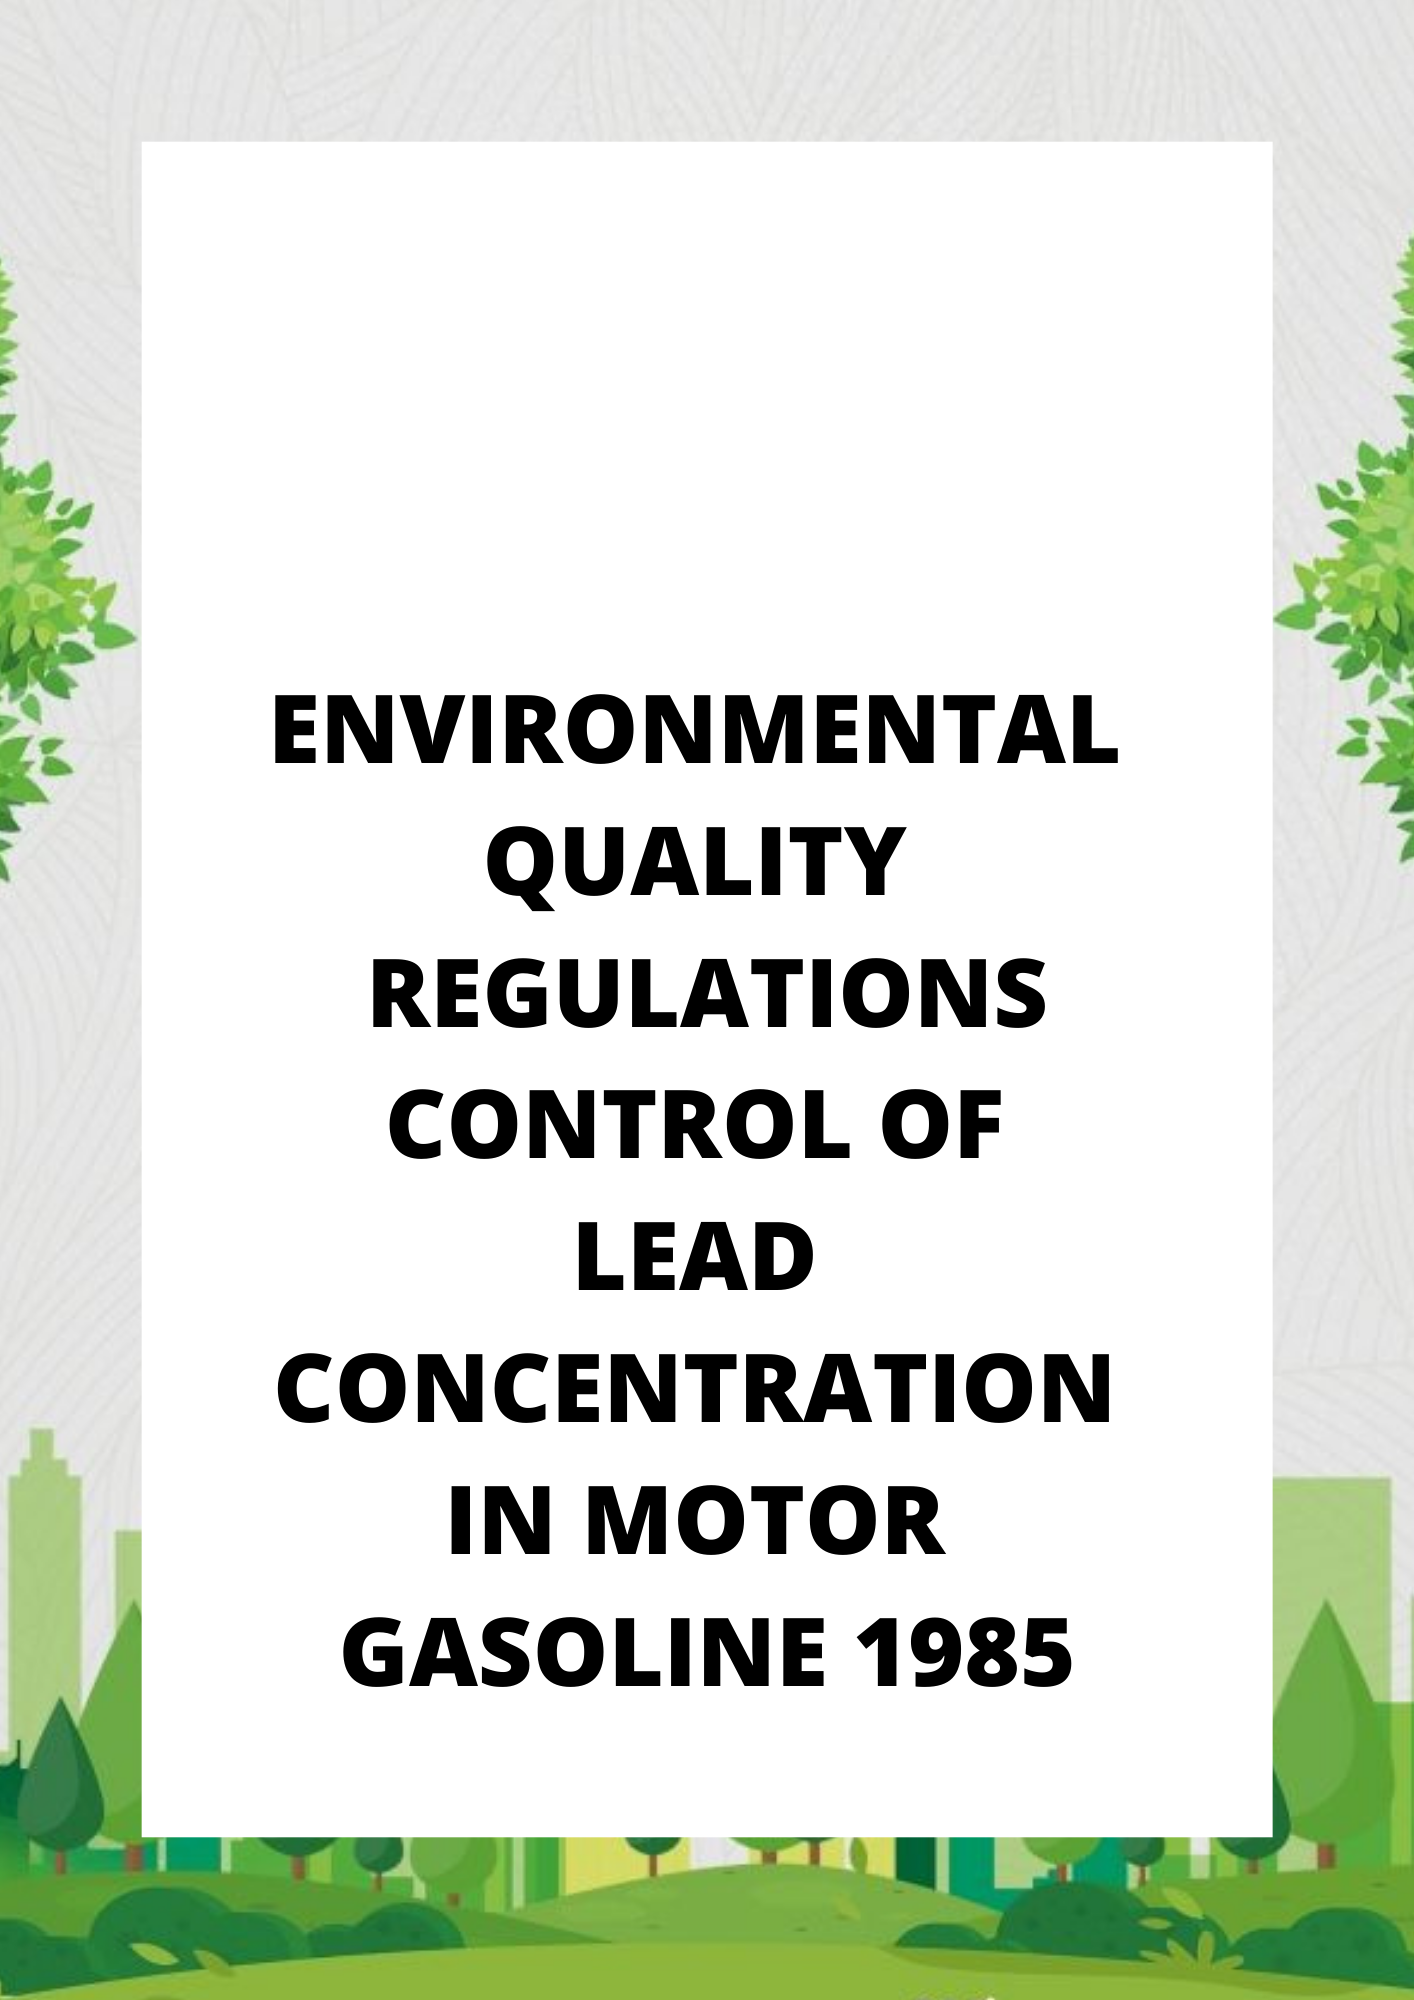 Environmental Quality Regulations Control of Lead Concentration in Motor Gasoline 1985